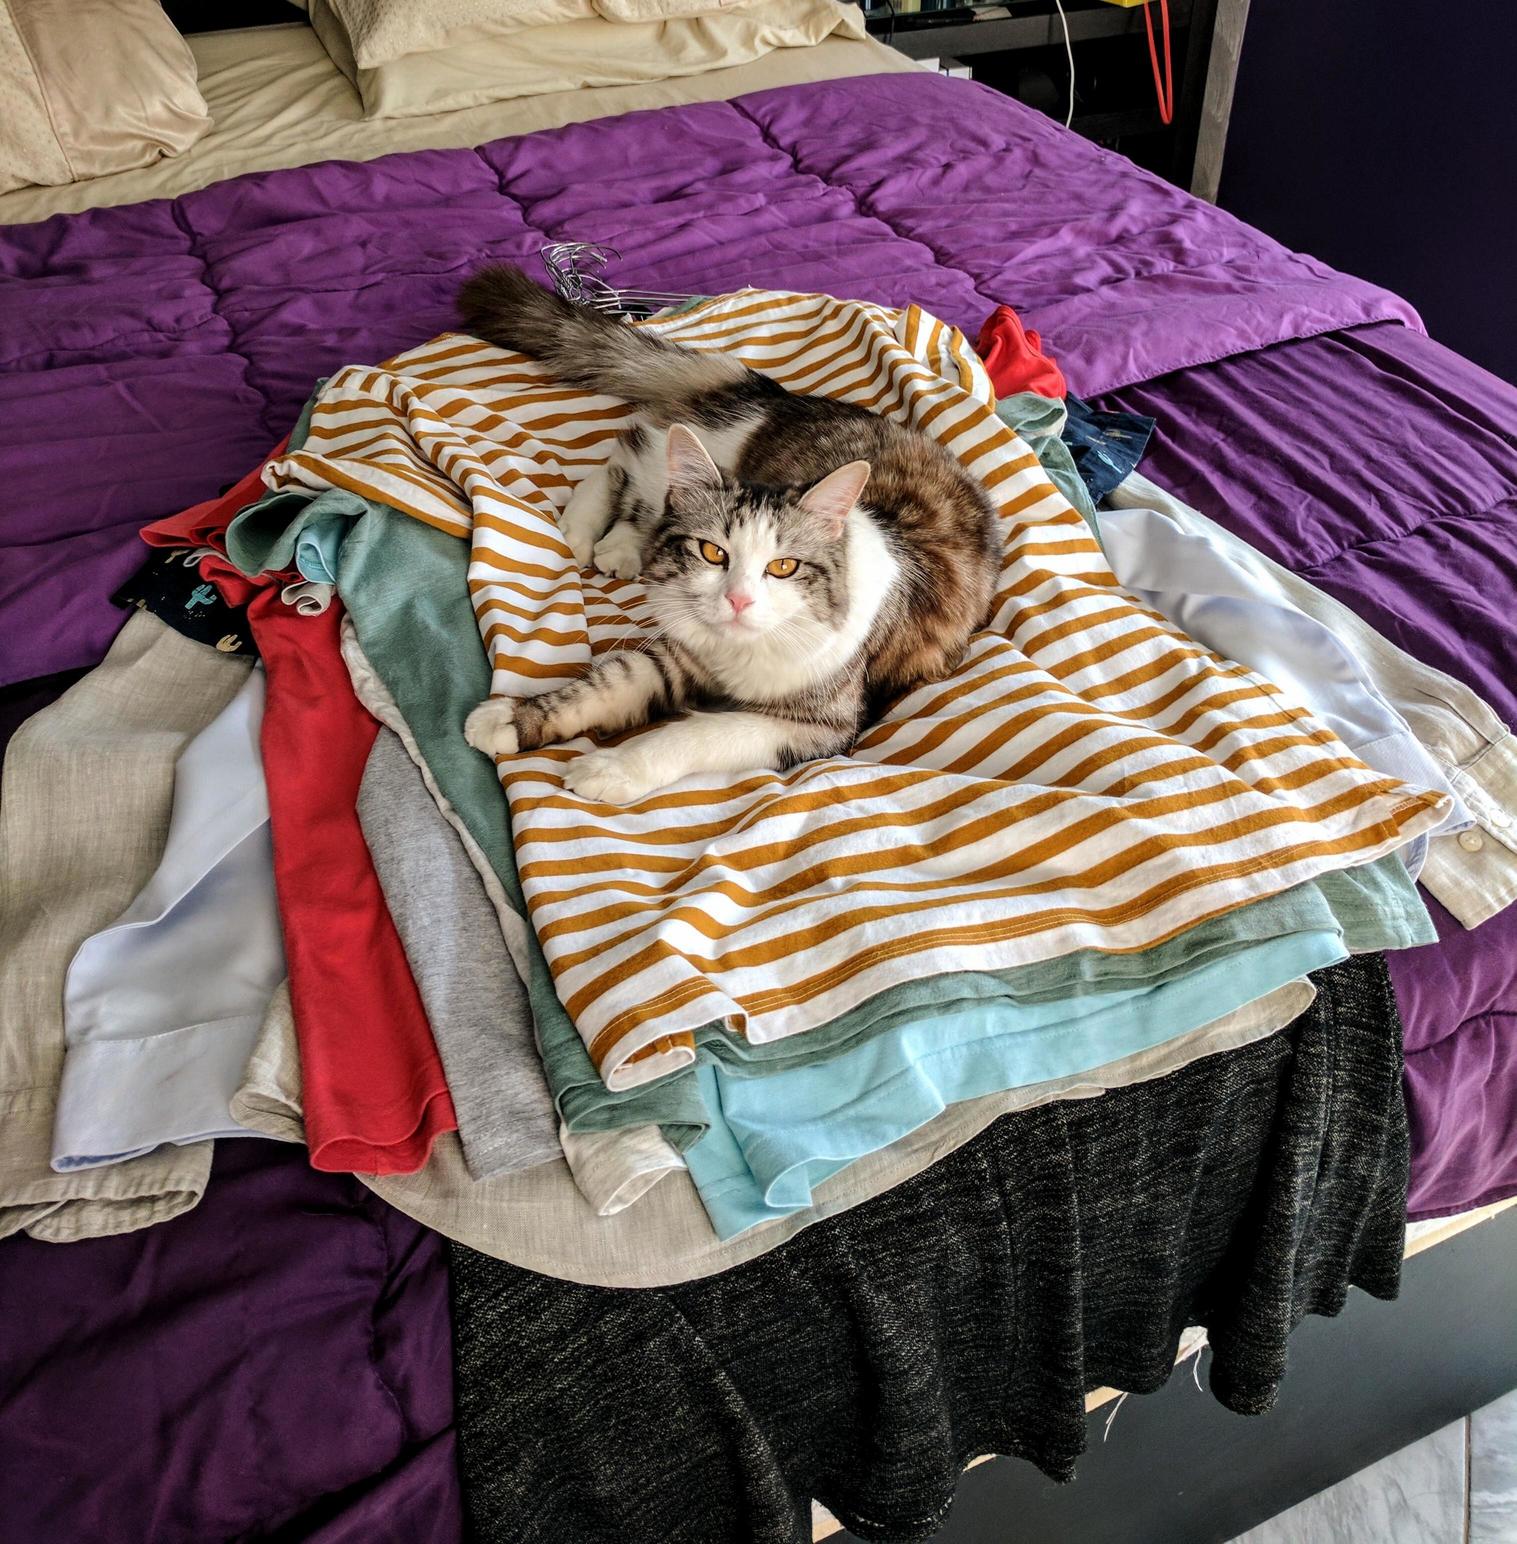 What a nice pile of clean clothes you have here. it would be a shame if someone shed on it.